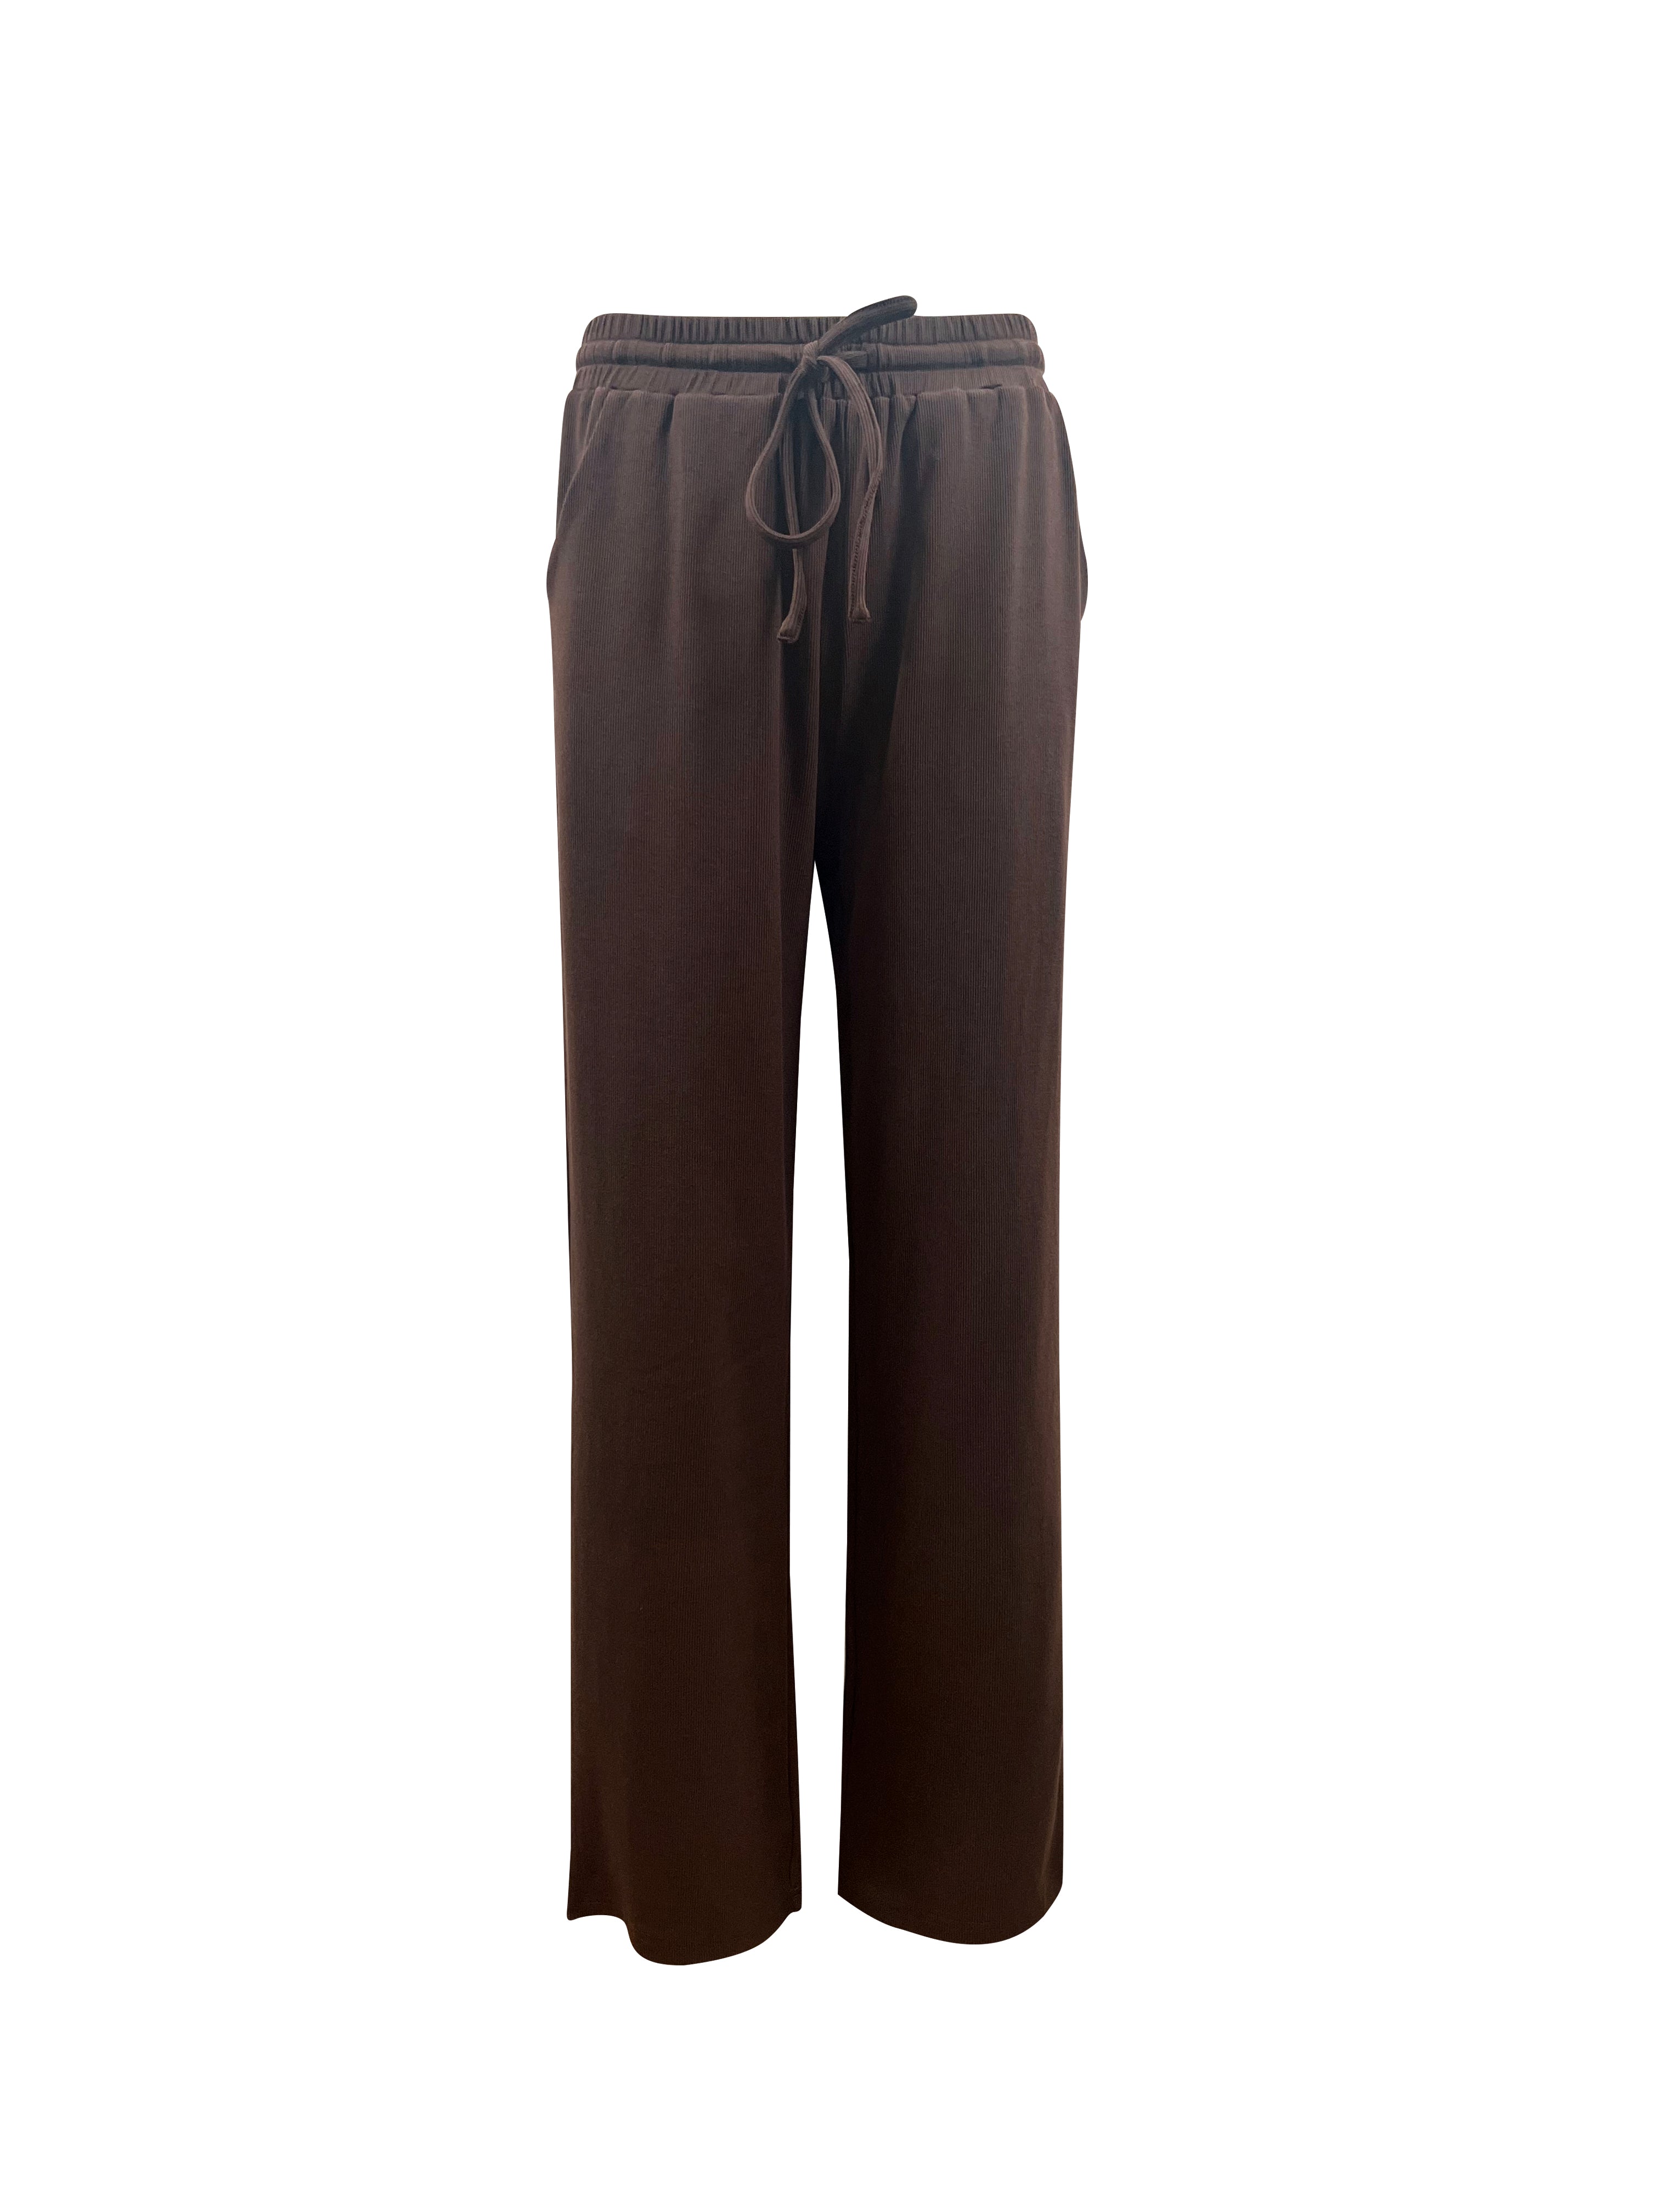 Olivia Knit Trouser - Chocolate